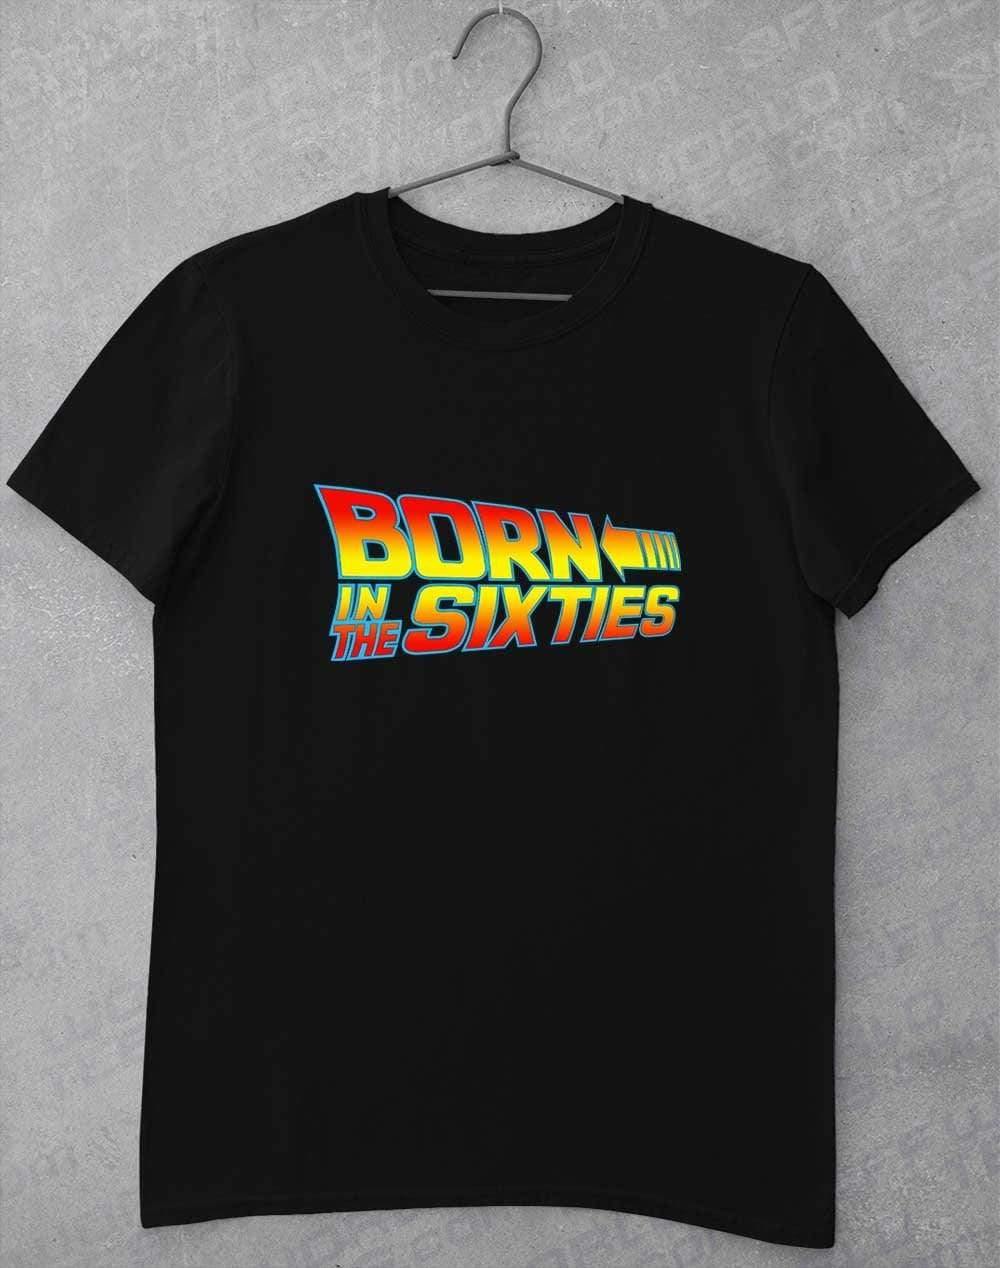 Born in the... (CHOOSE YOUR DECADE!) T-shirt THE SIXTIES - Black / S  - Off World Tees